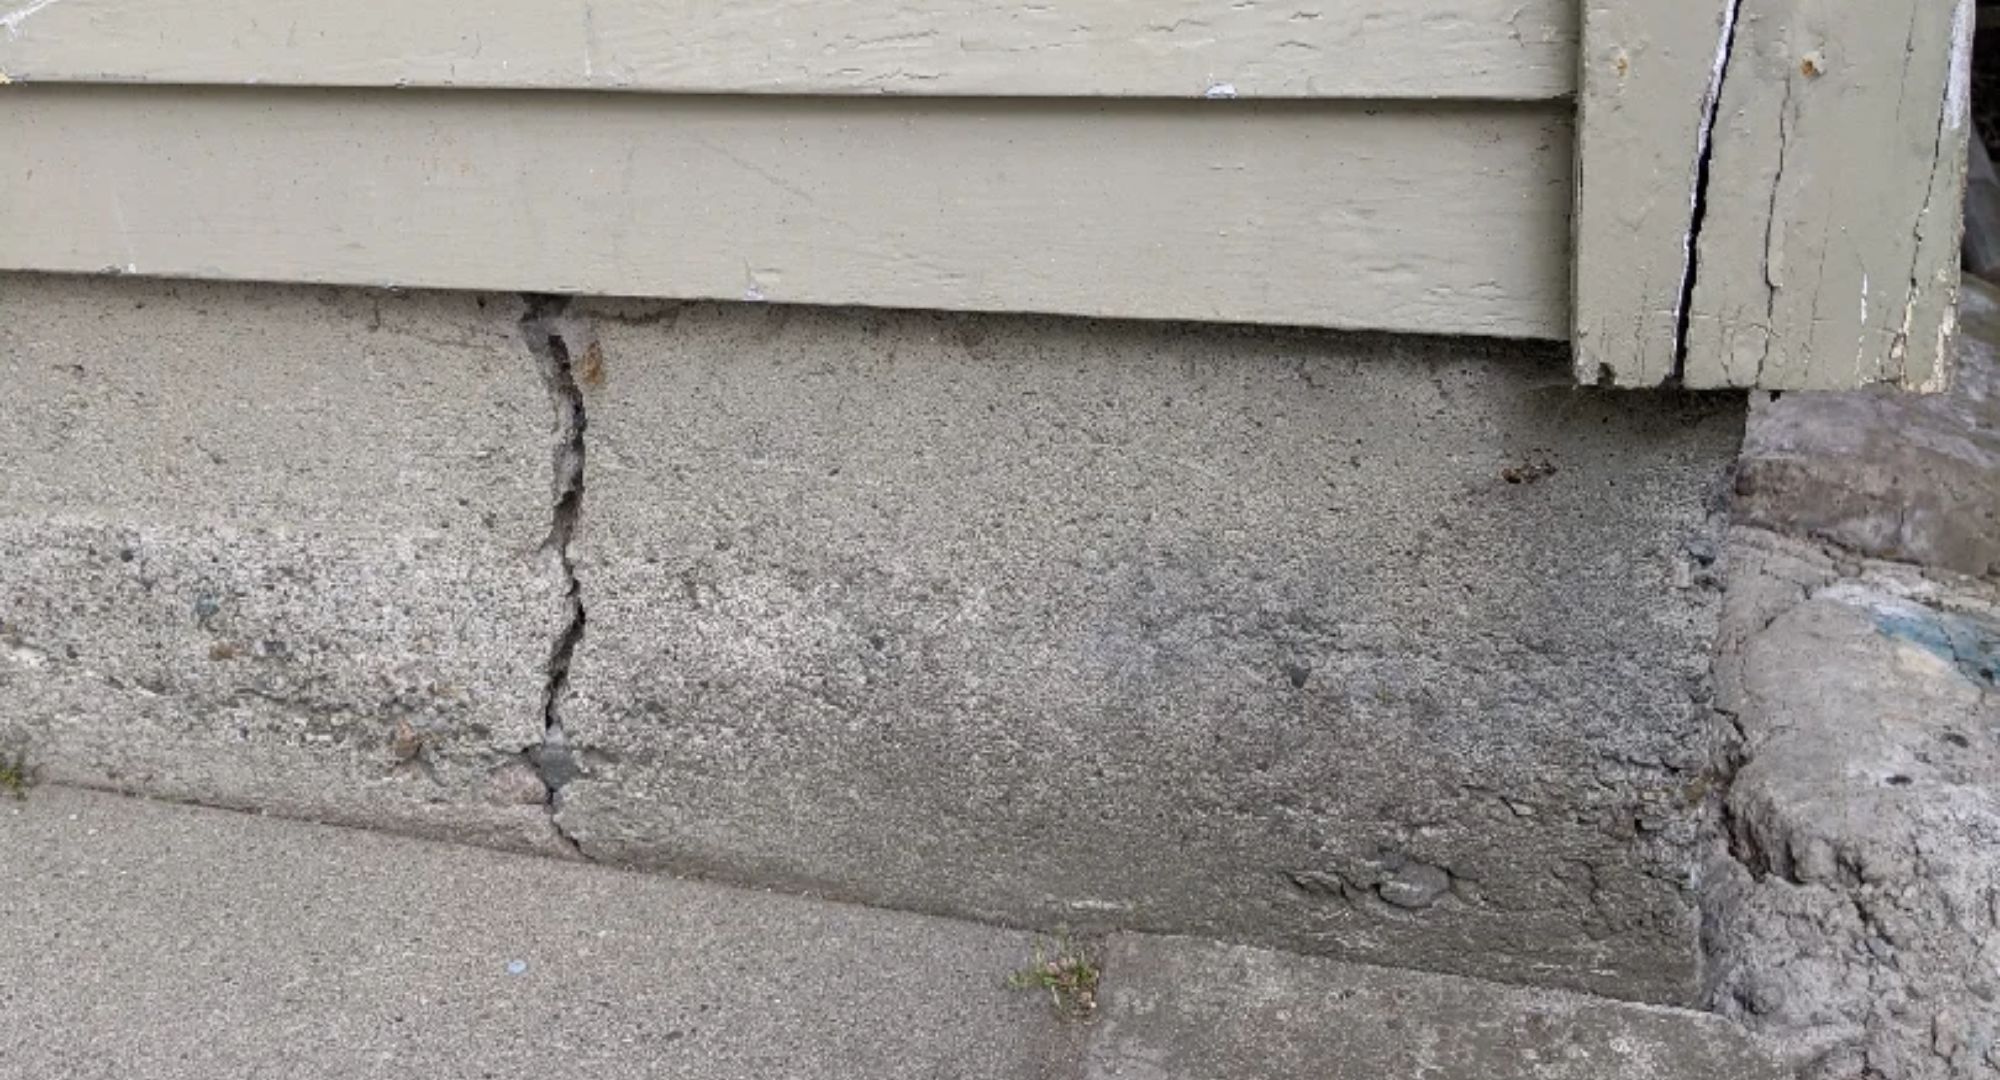 How wide are the cracks?